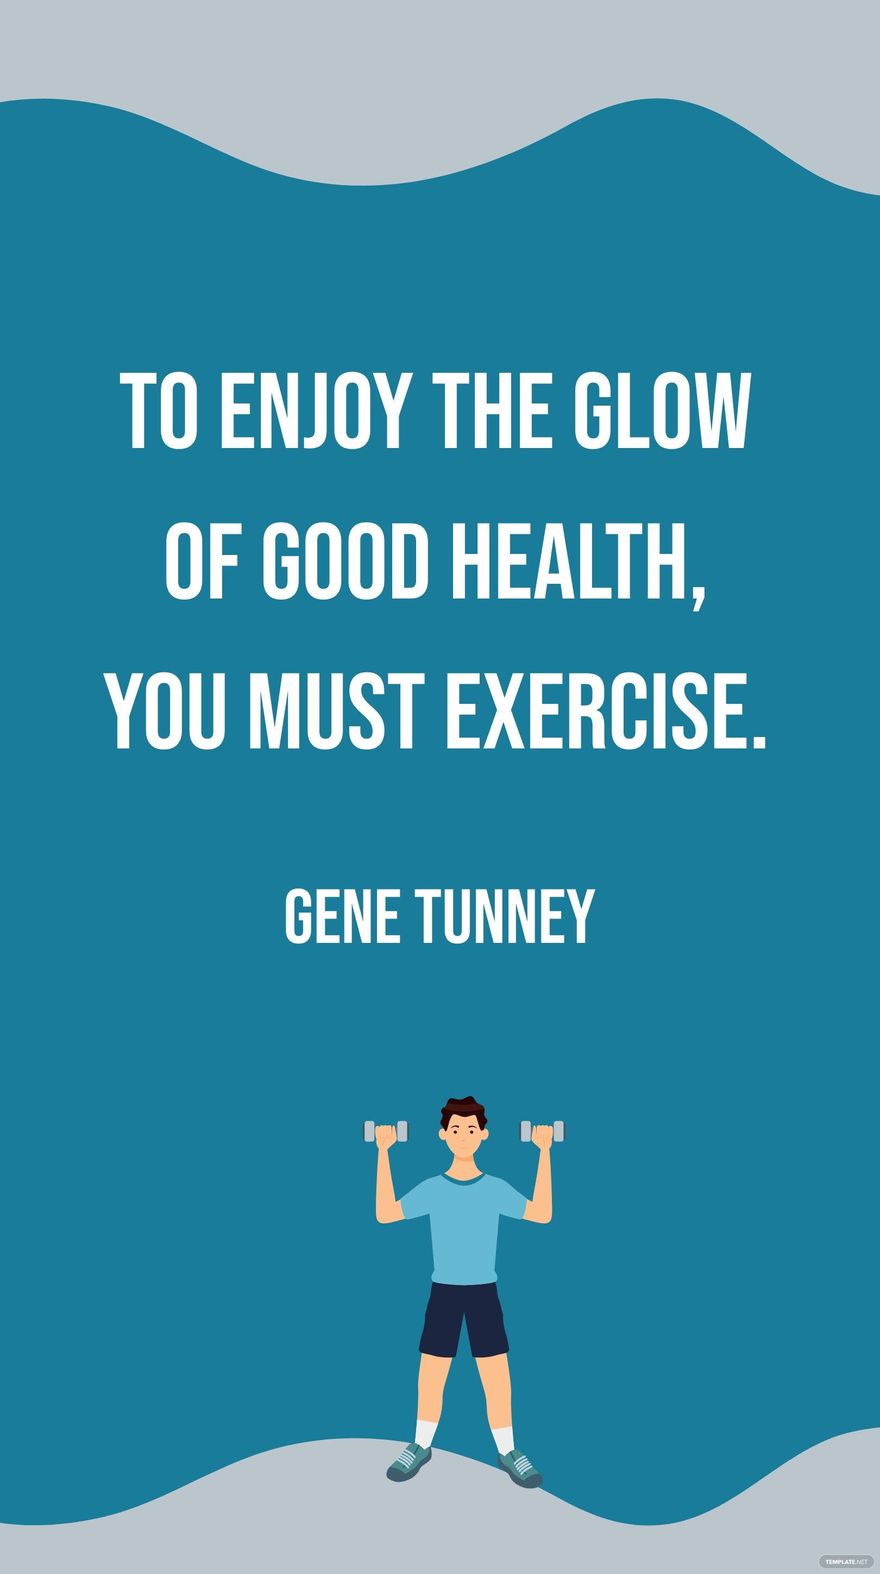 Free Gene Tunney - To enjoy the glow of good health, you must exercise. in JPG